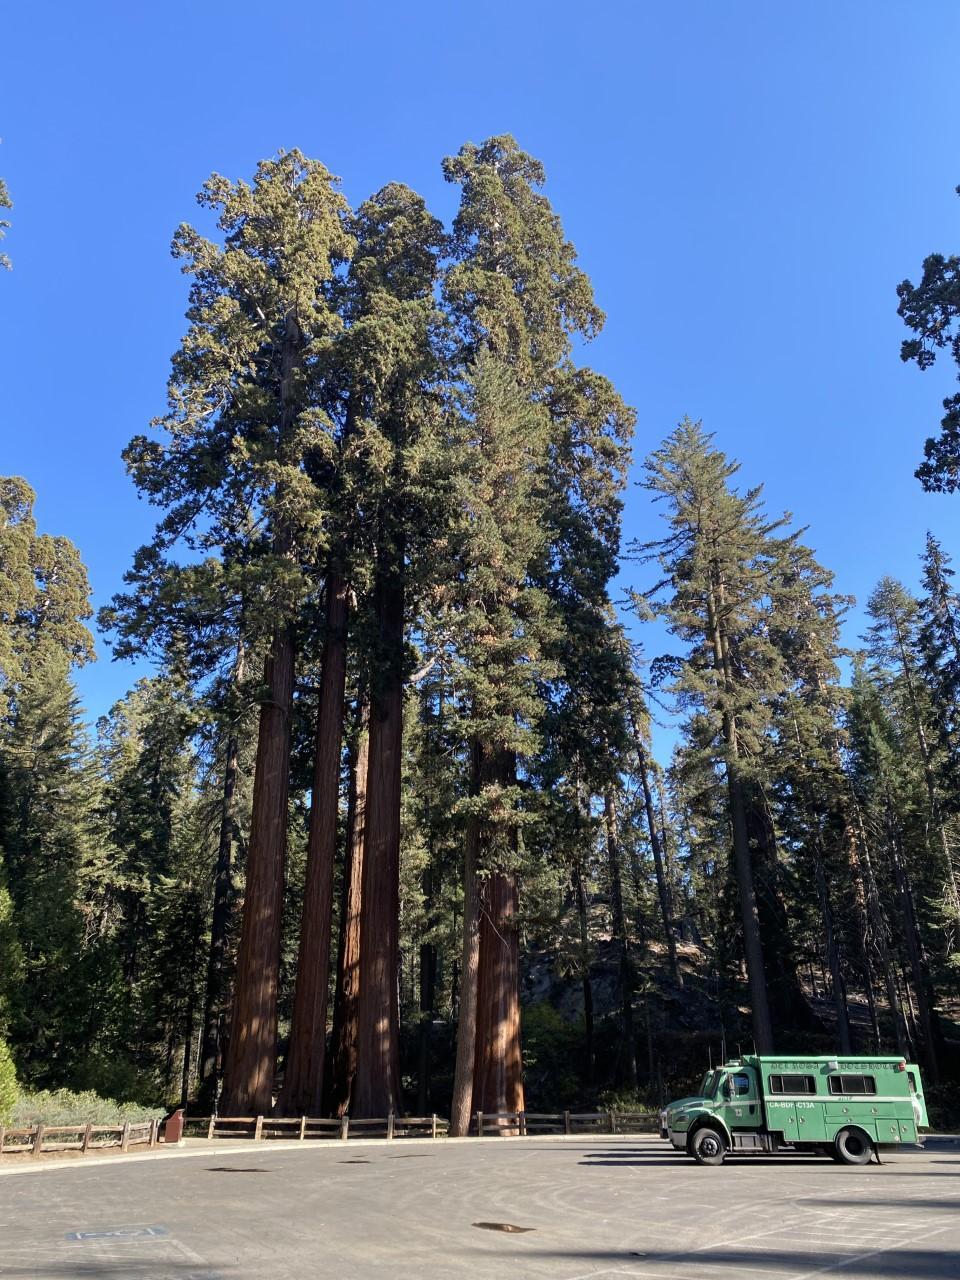 A green fire truck parked in an empty lot in front of multiple large red sequoia trees